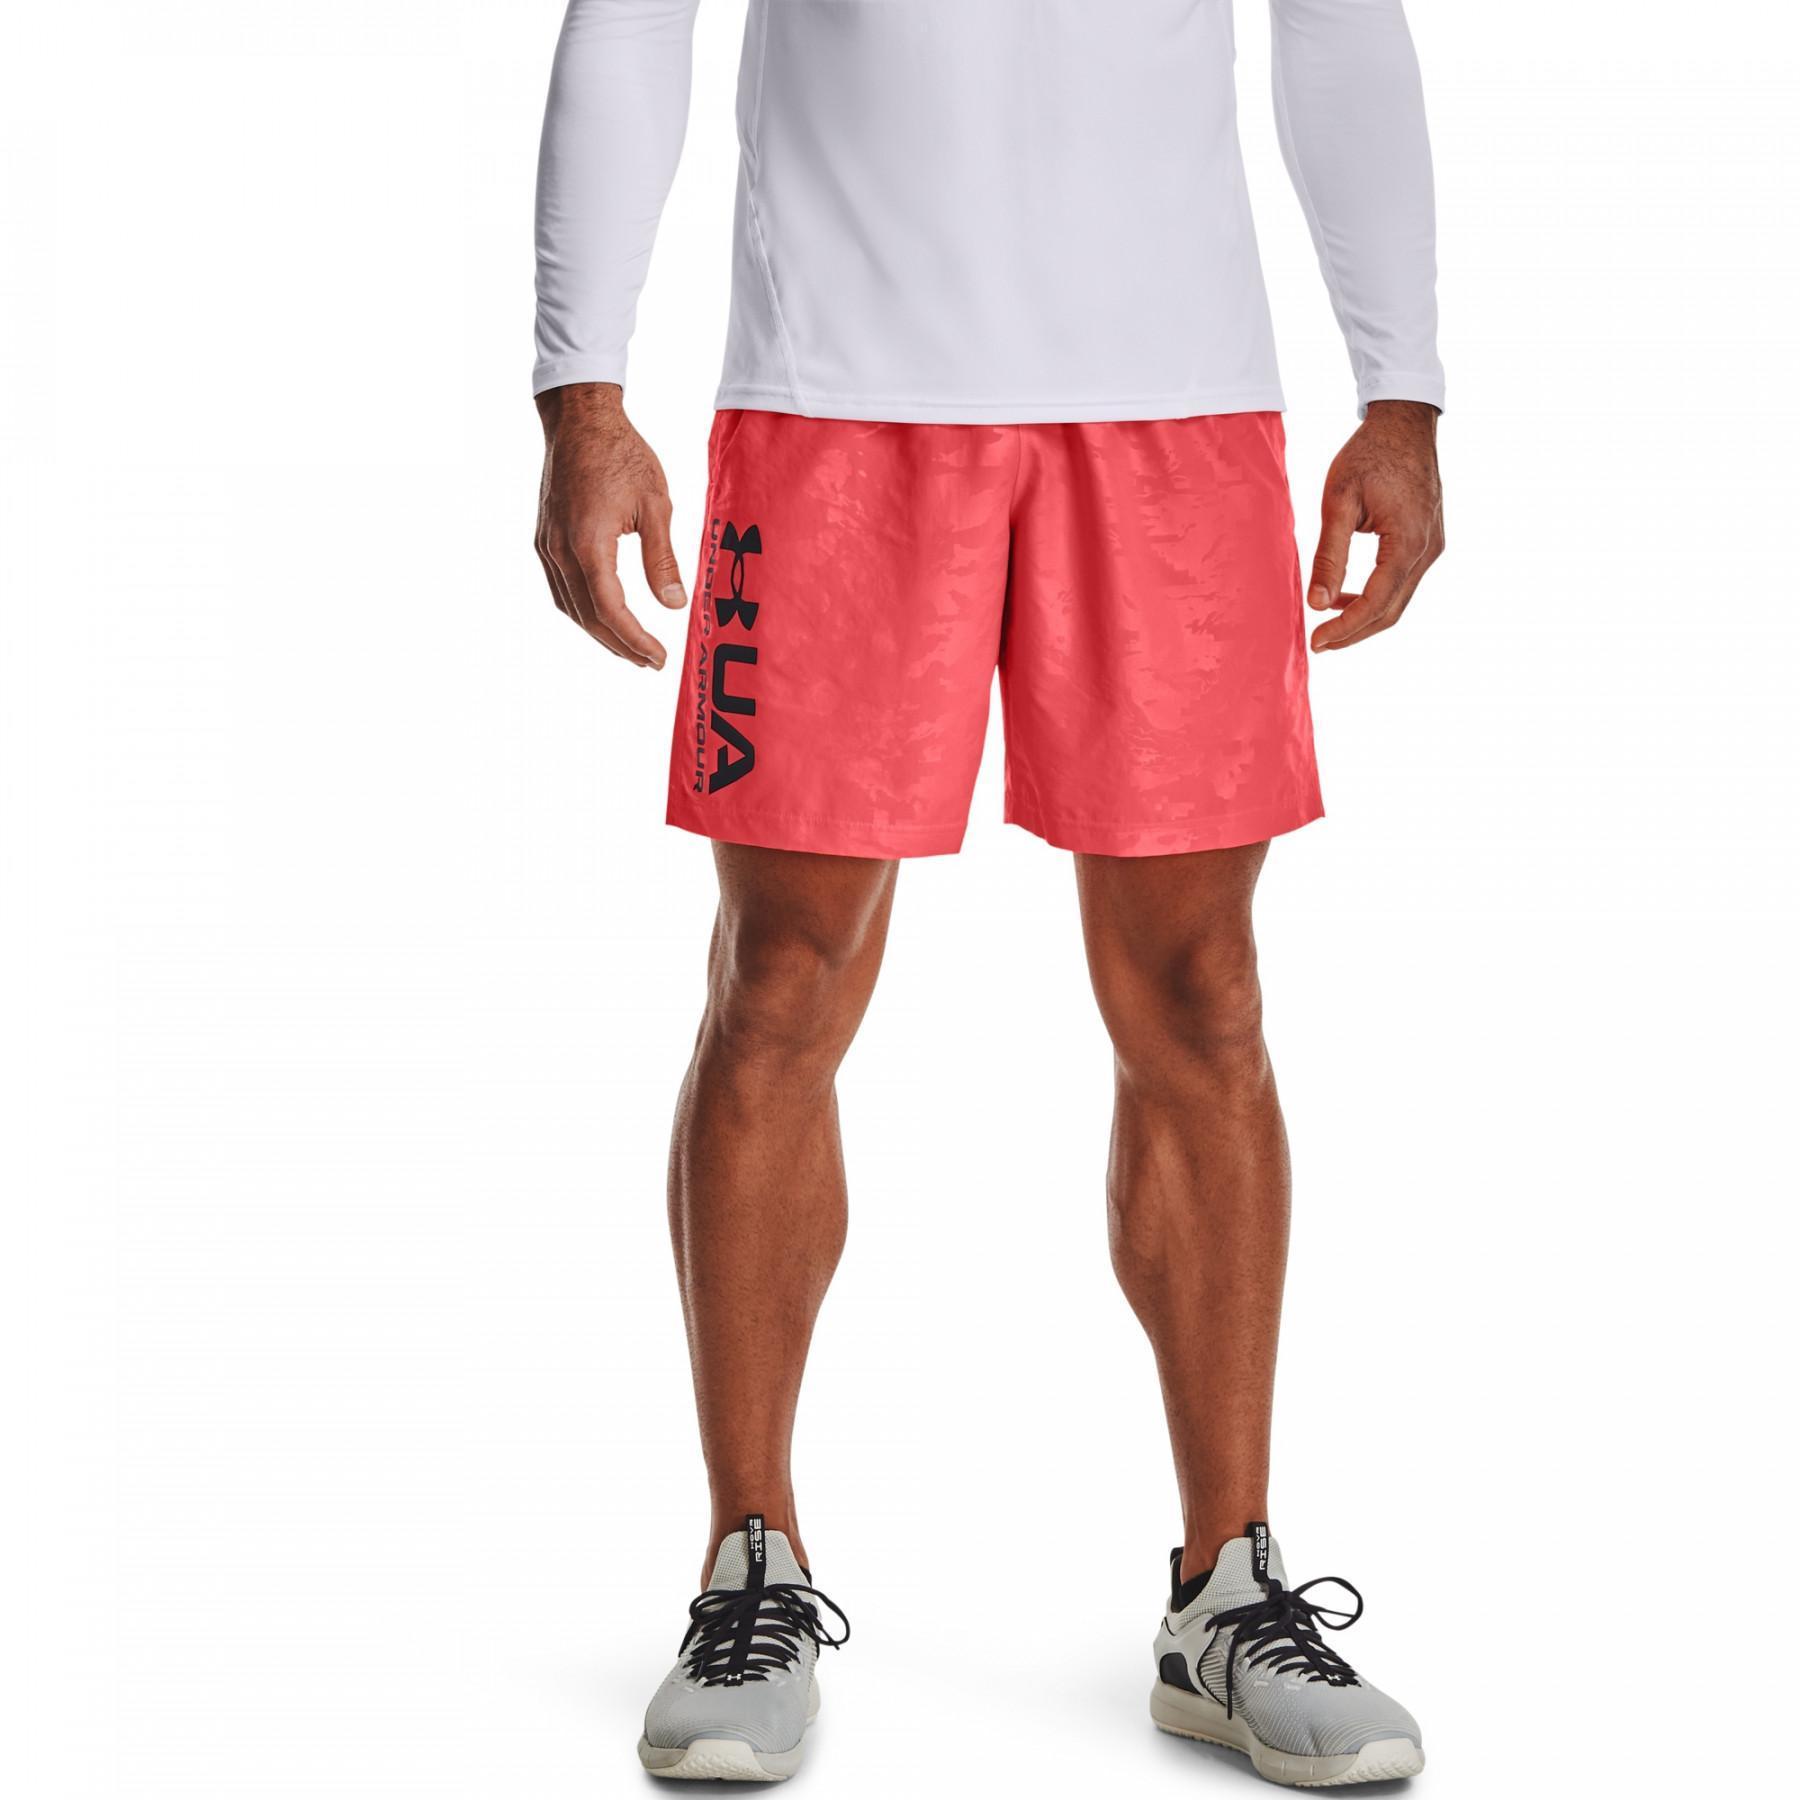 Woven shorts Under Armour Emboss